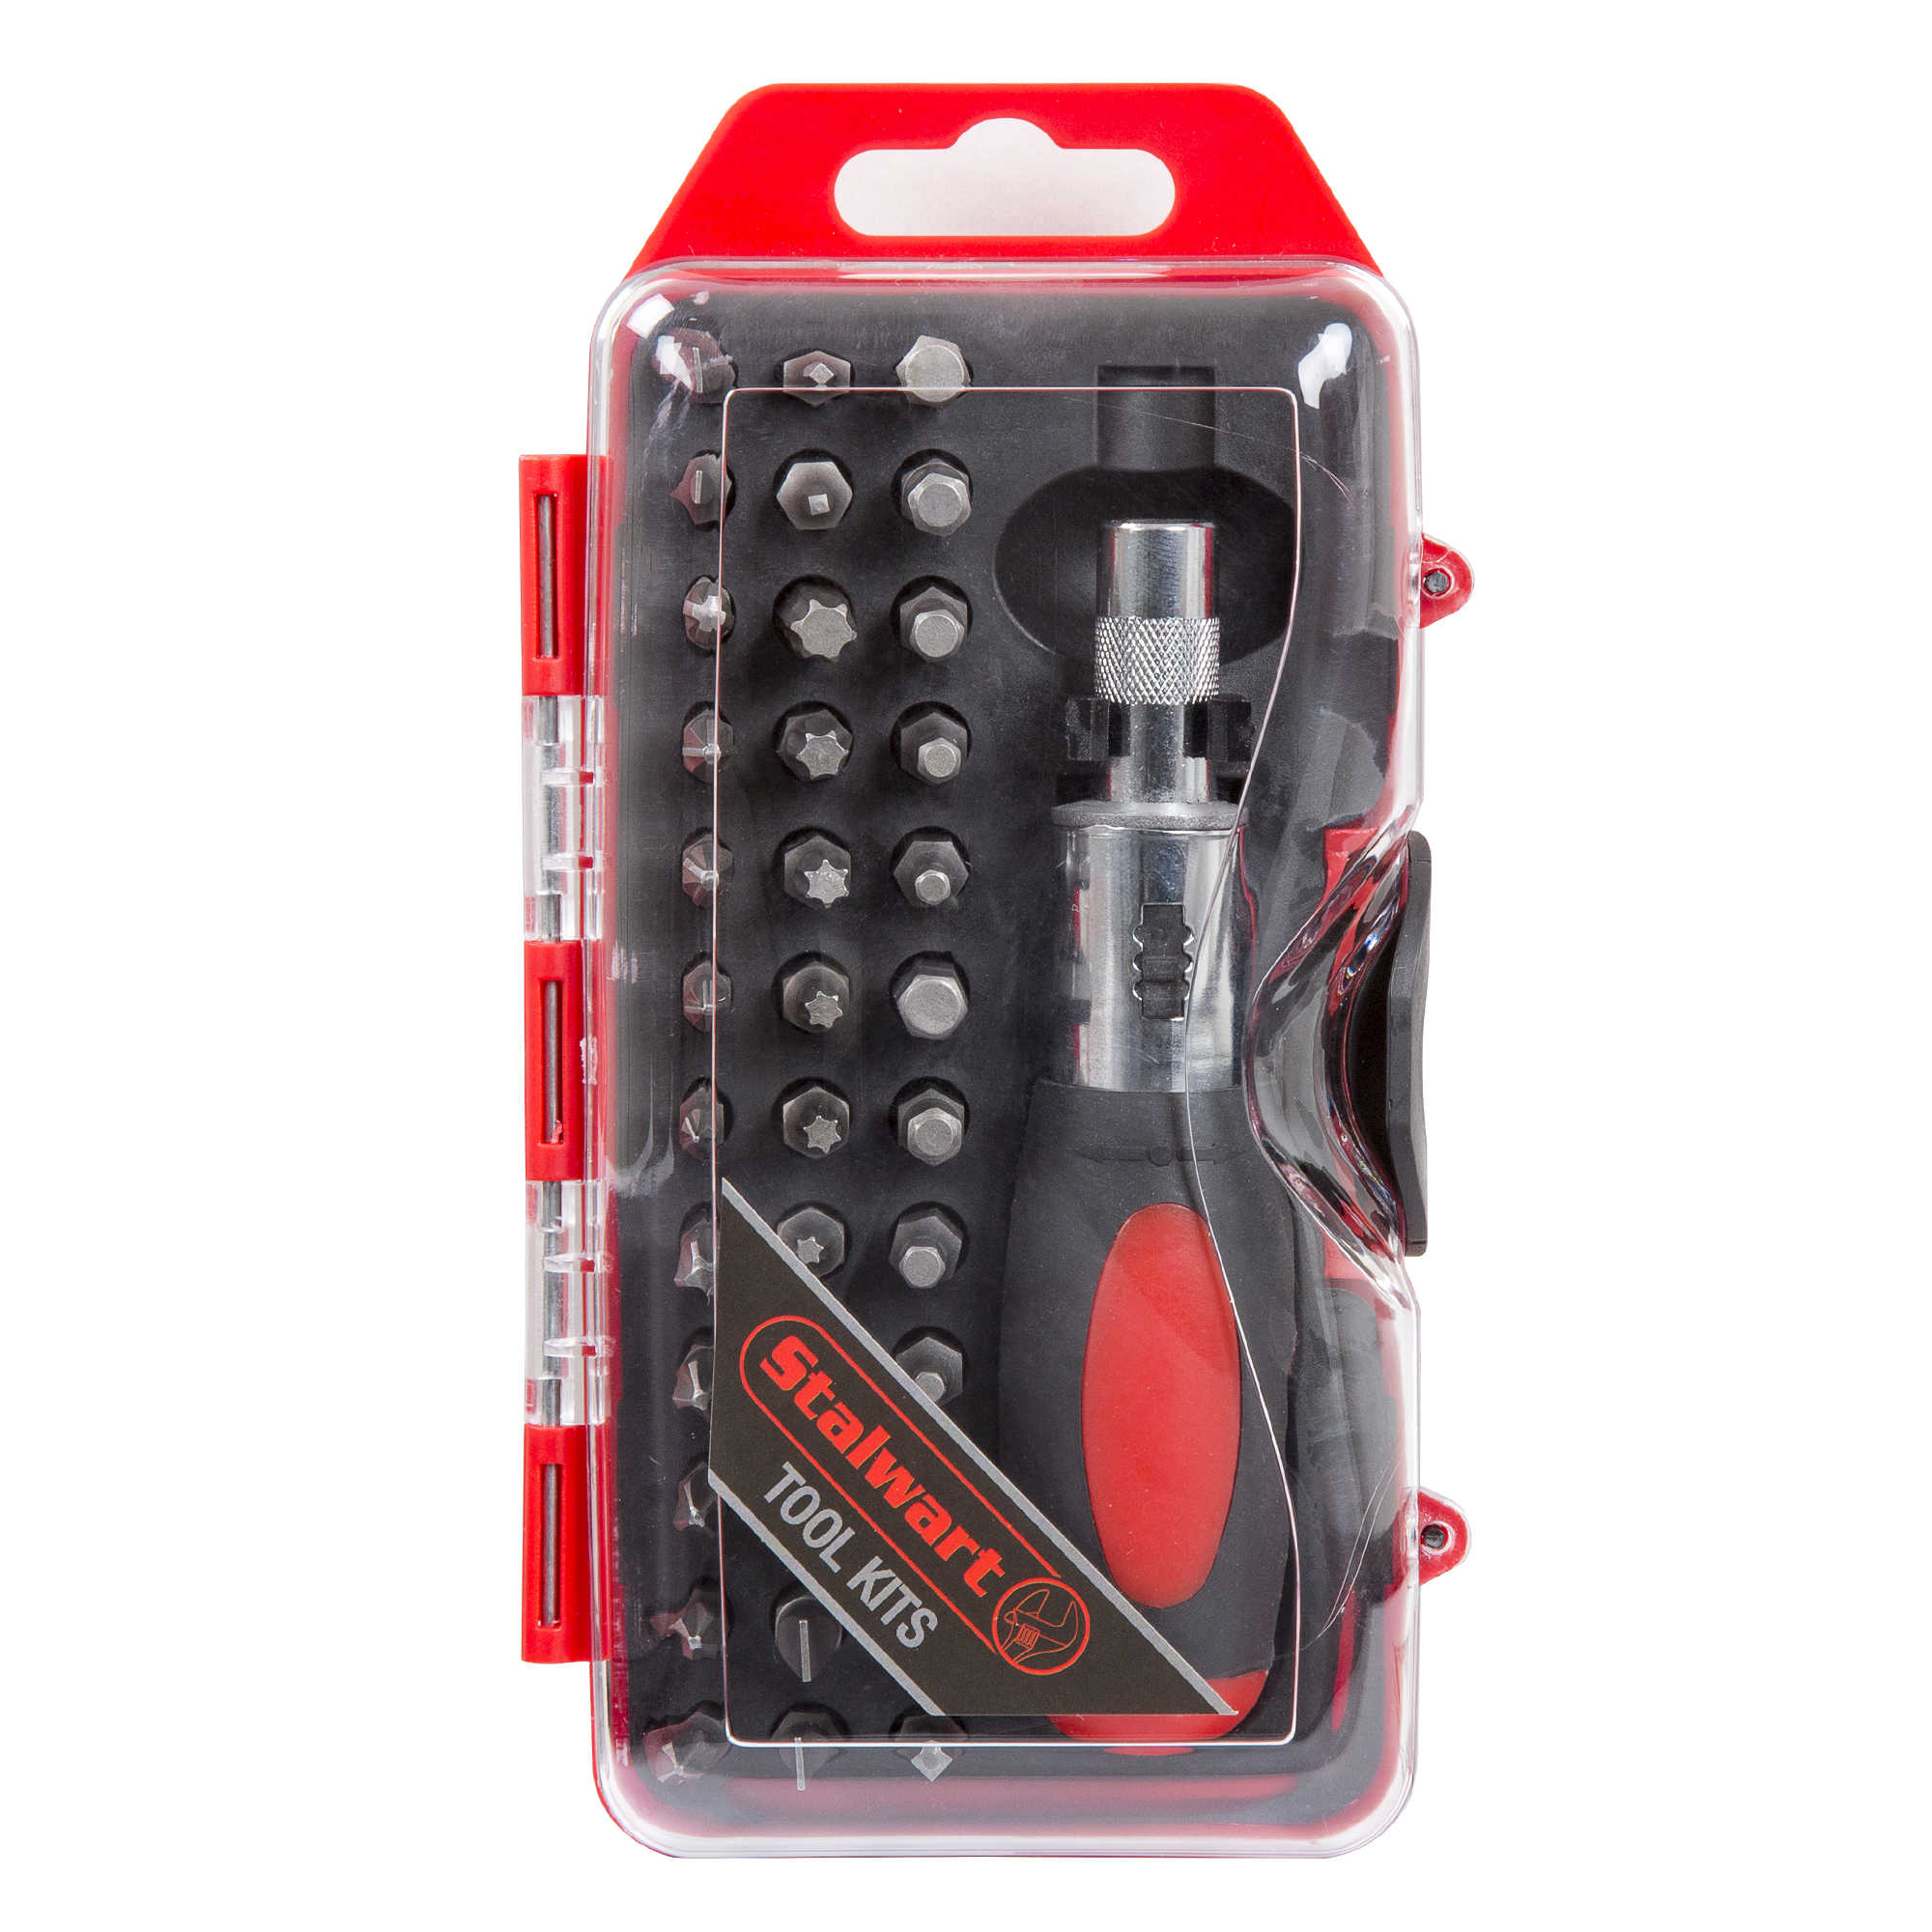 Stubby Ratchet and Screwdriver Bit Set 37 PC by Stalwart